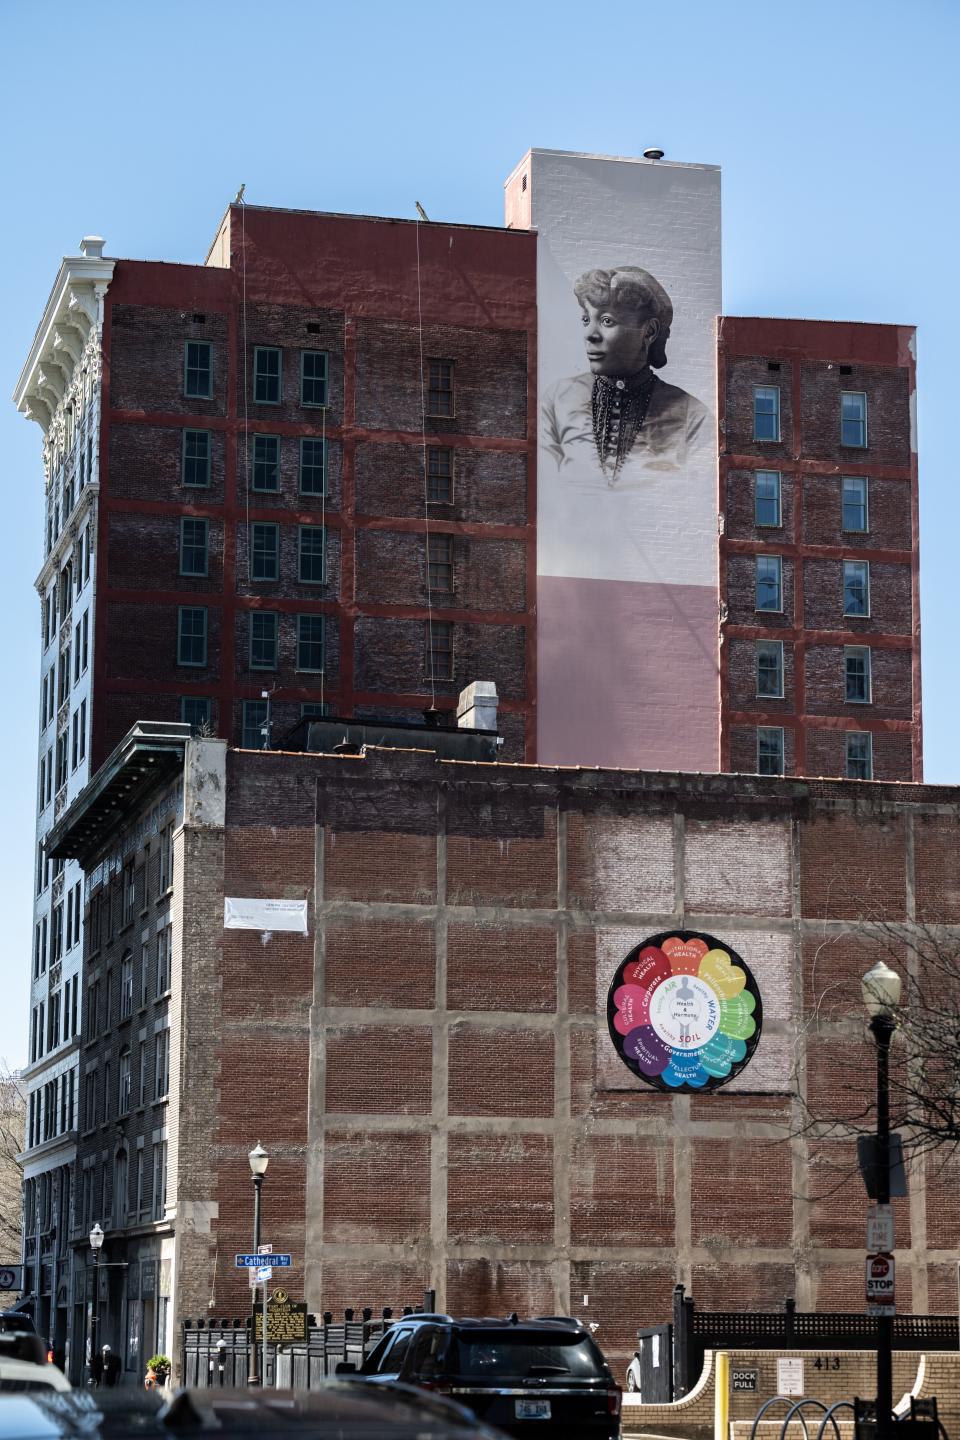 Original Photograph provided by the Portland Museum of Kentucky via a relative of Henrietta, Phillip Cherry. Hand-painted mural in Louisville, KY. Located on the corner of 5th ave. and Muhammad Ali Blvd.